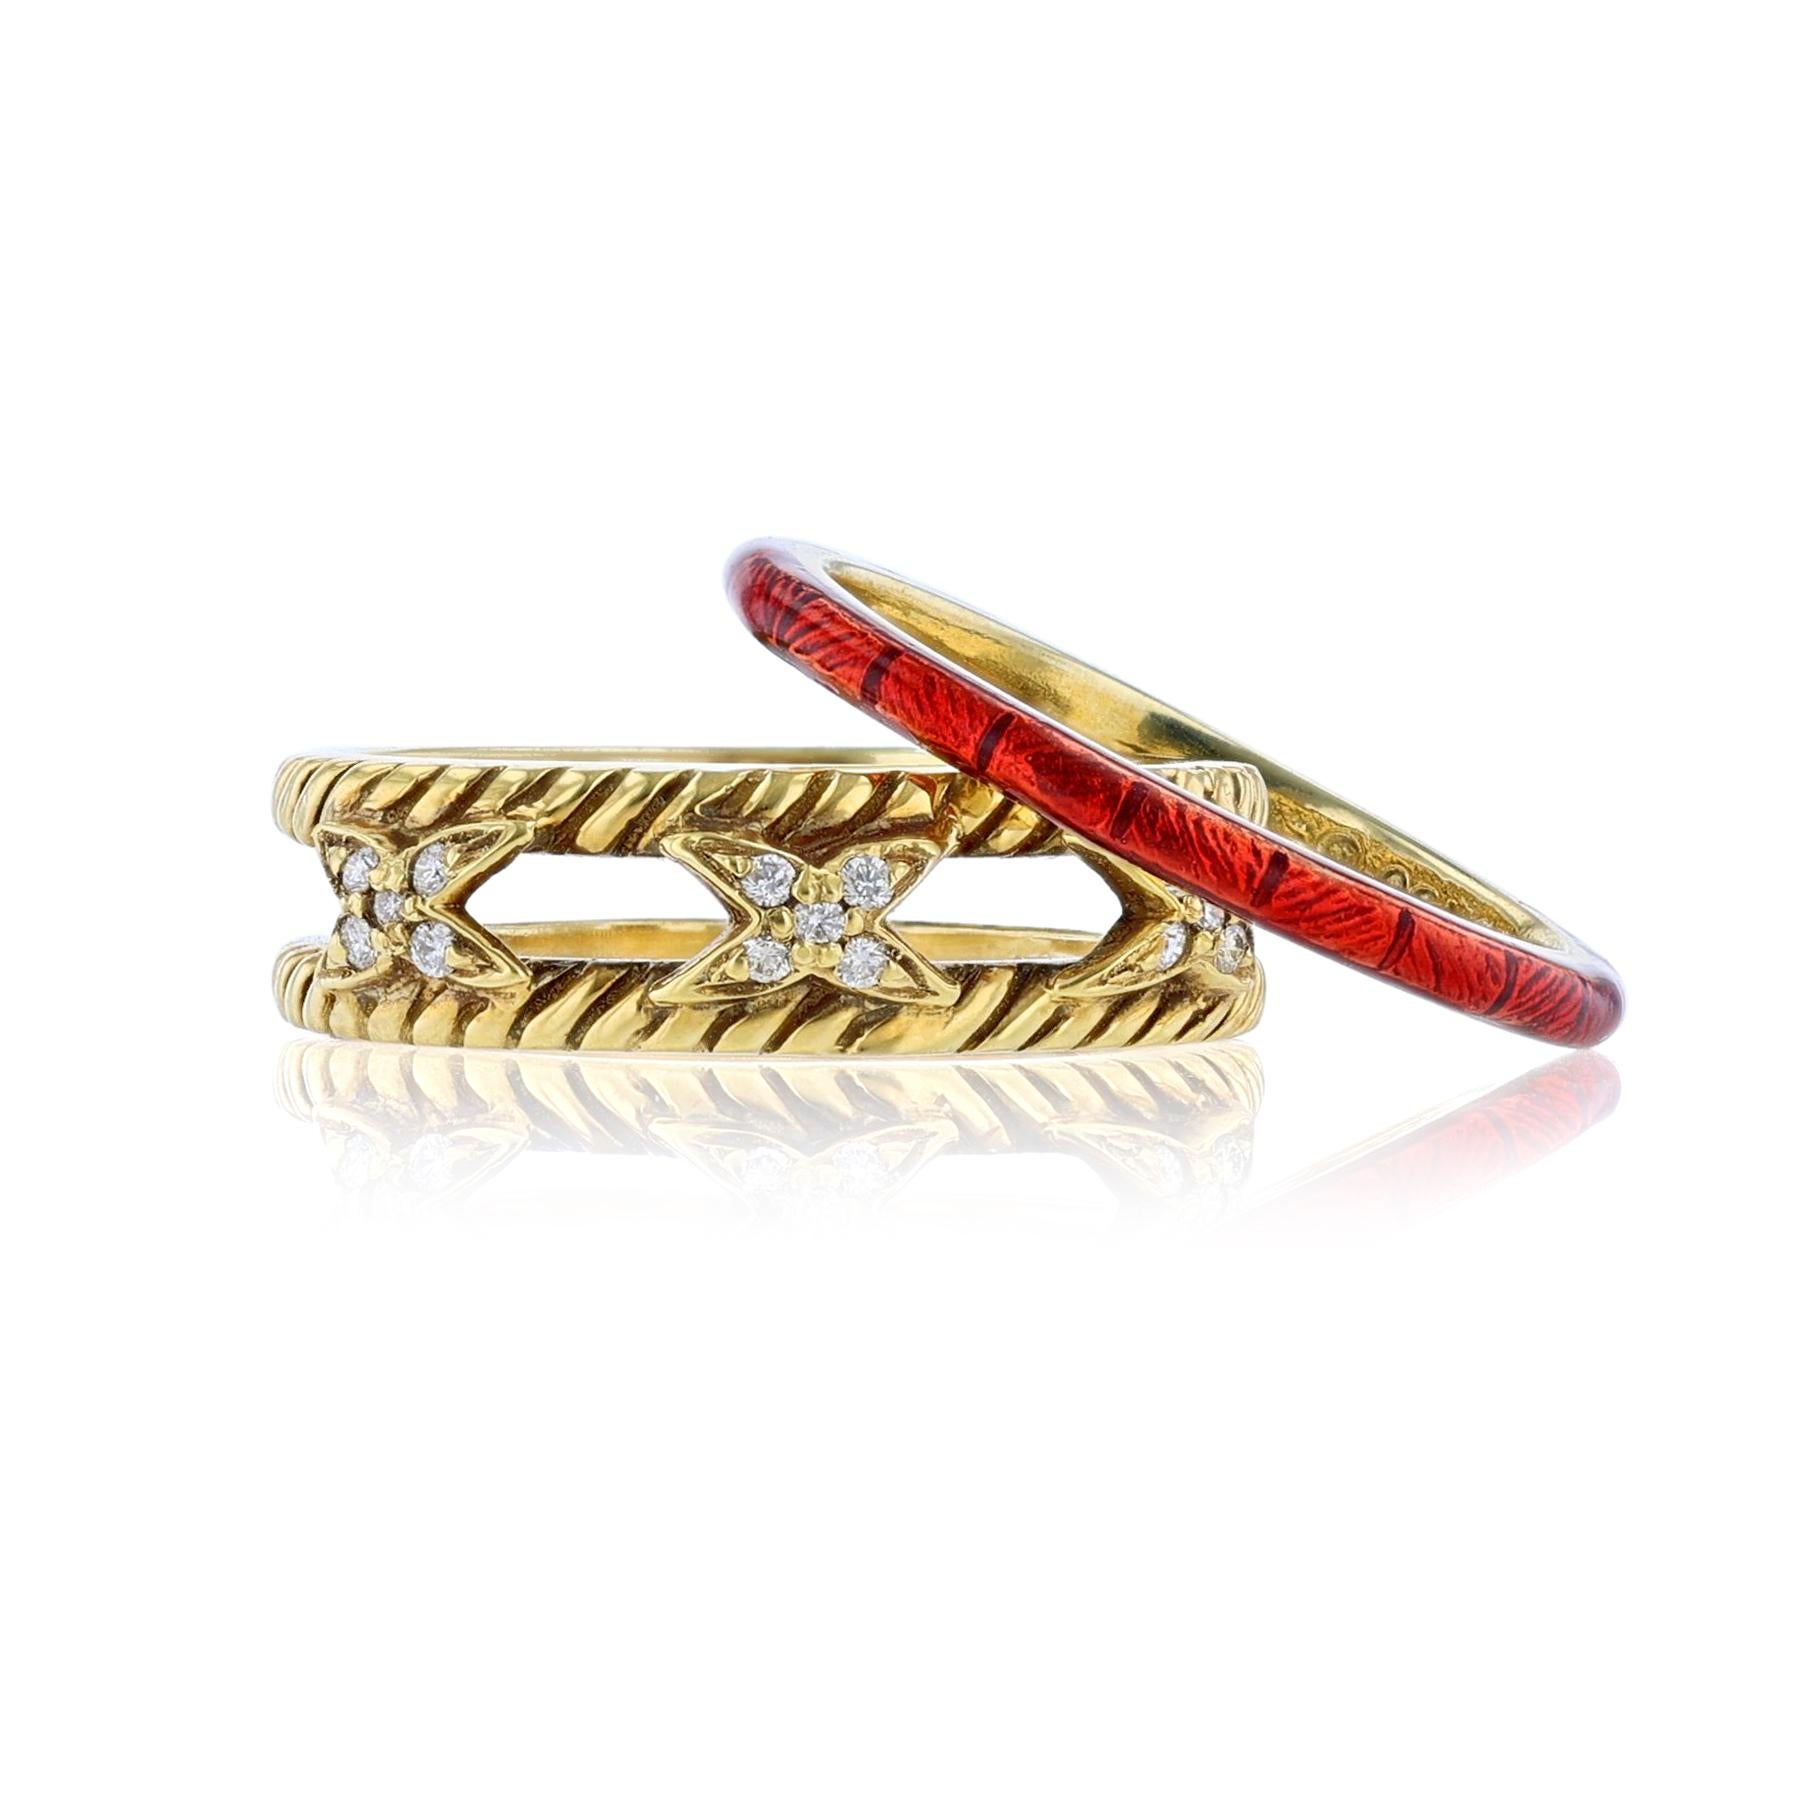 This ring set has a jacket ring made in 18K yellow gold with 3 